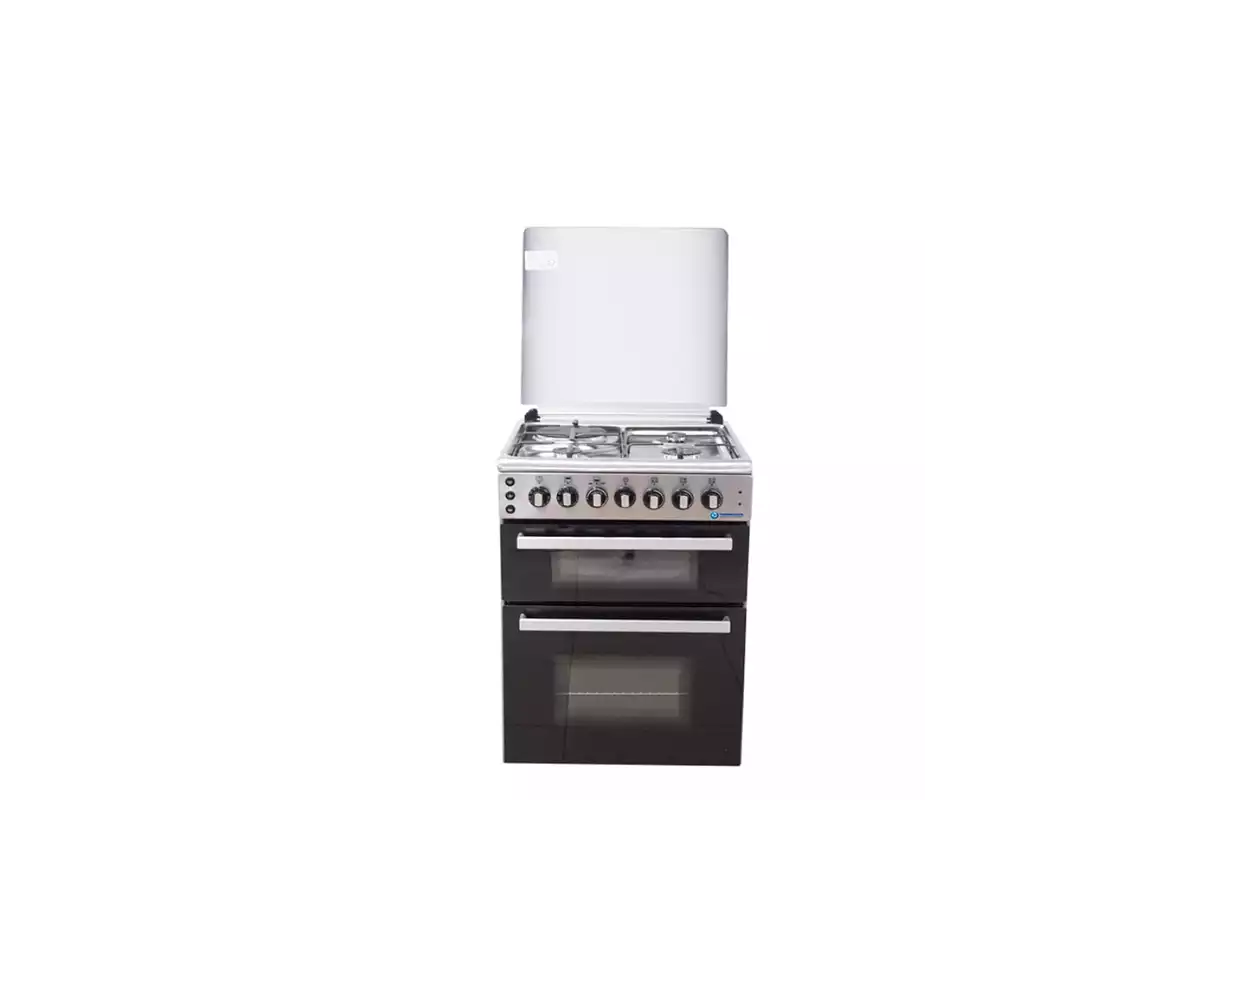 Haier Thermocool Gas Cooker (My Diva 603G1E OGDC-6831)